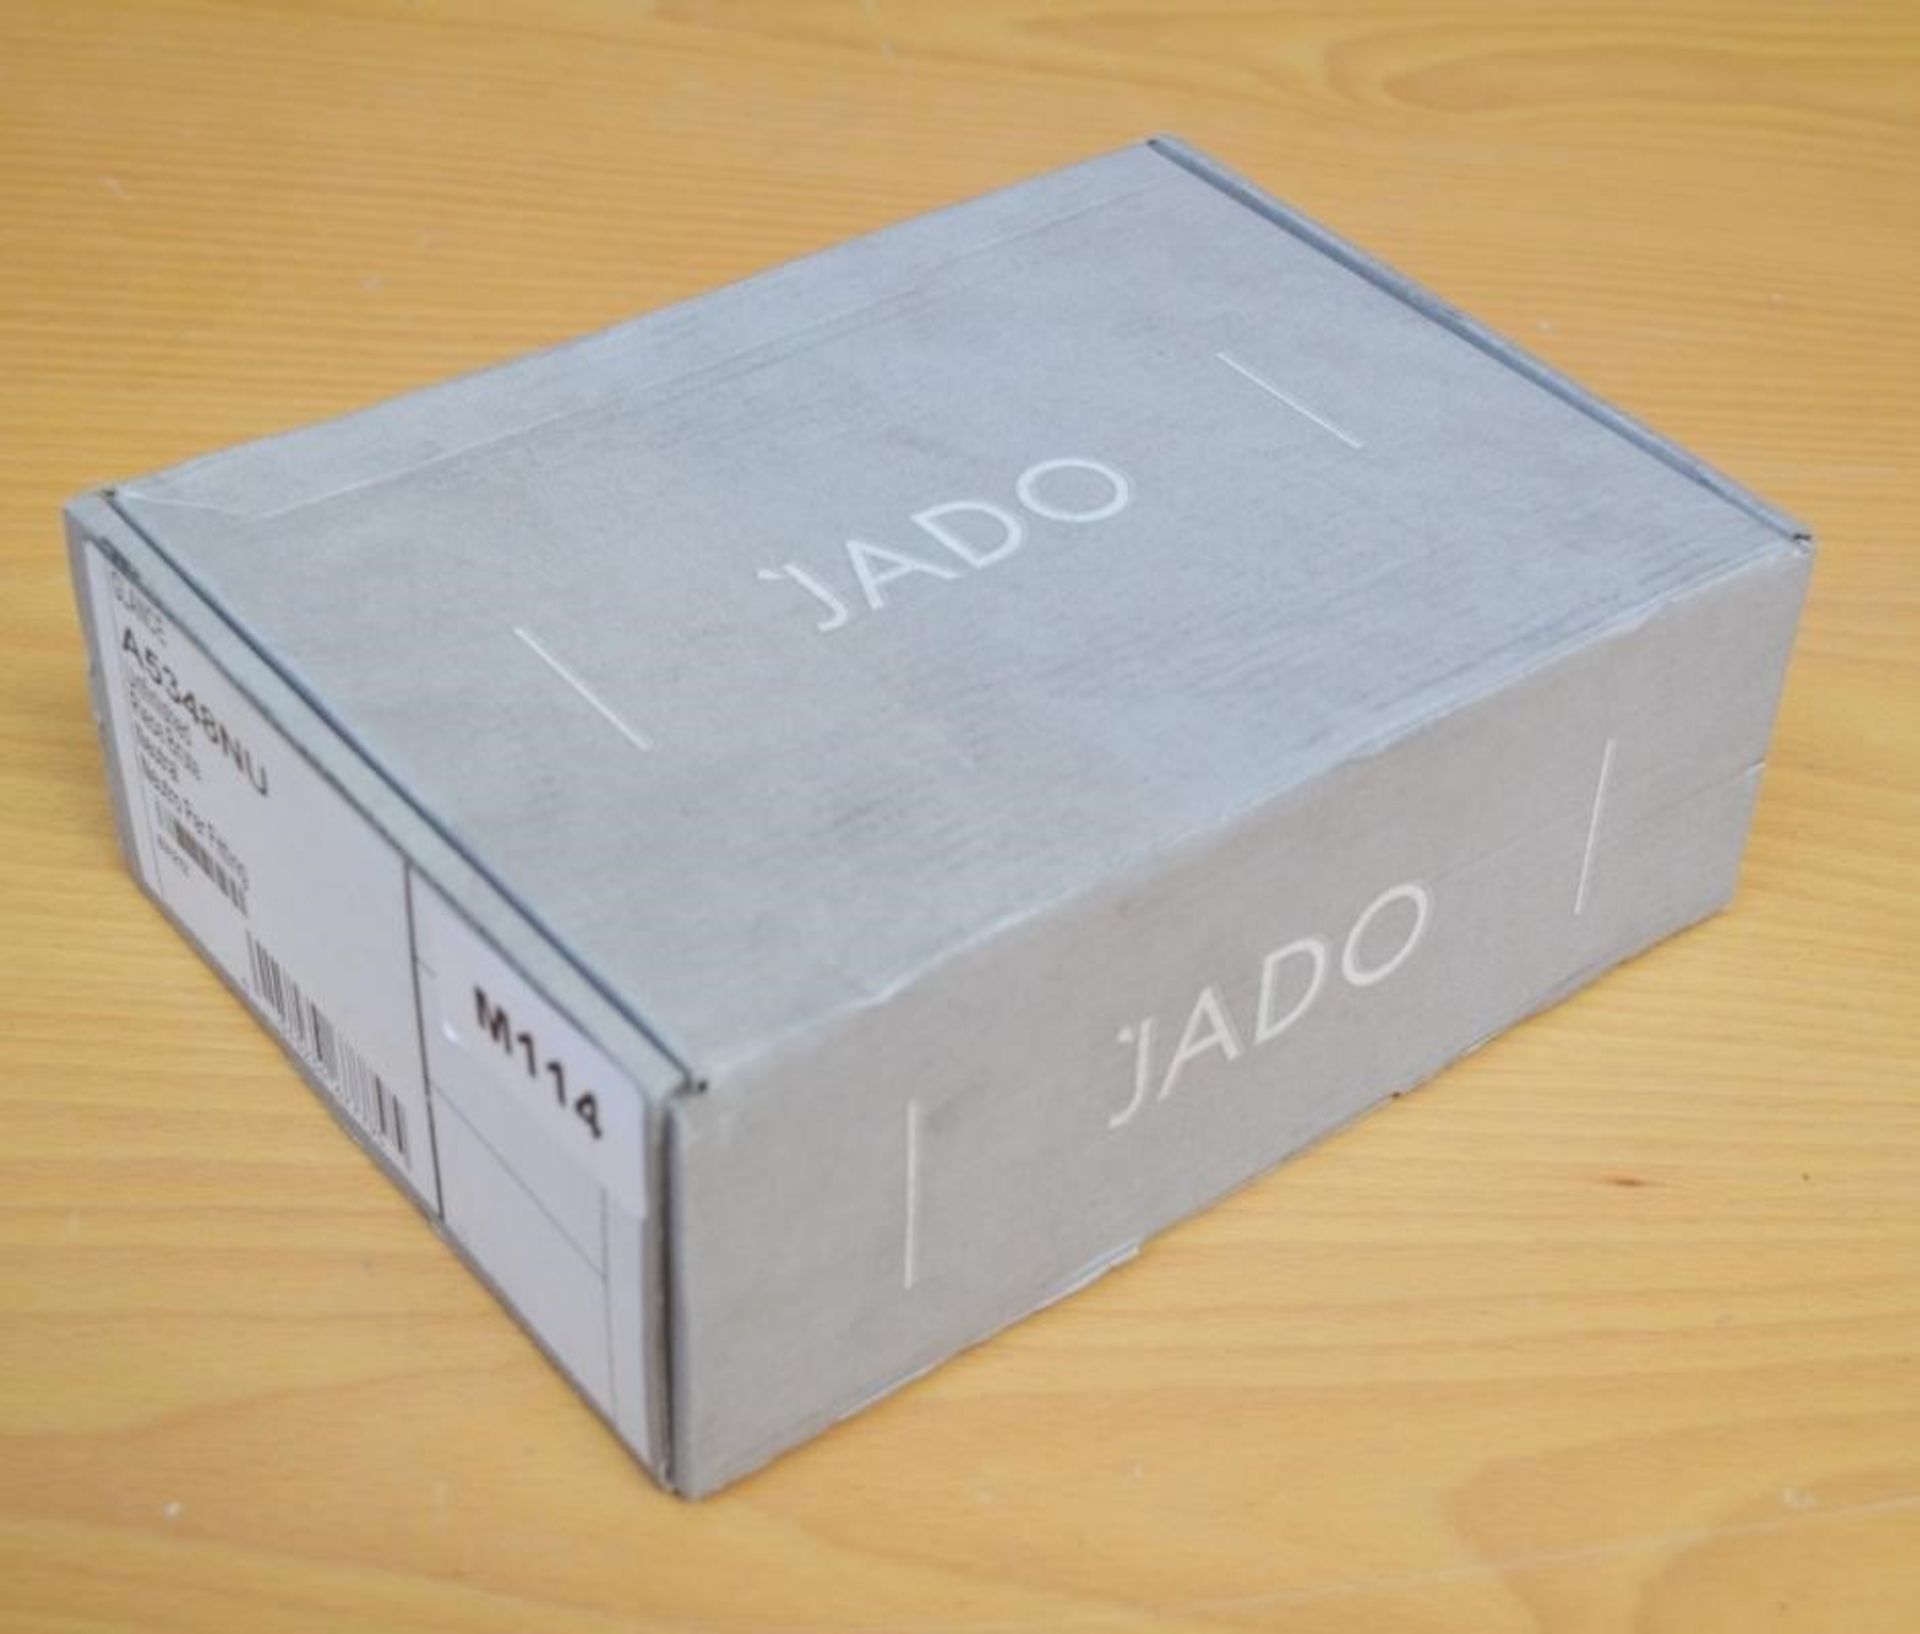 1 x Ideal Standard JADO "Glance" Concealed Parts (A5348NU) - Chrome Finish - New / Unused Boxed Stoc - Image 2 of 8